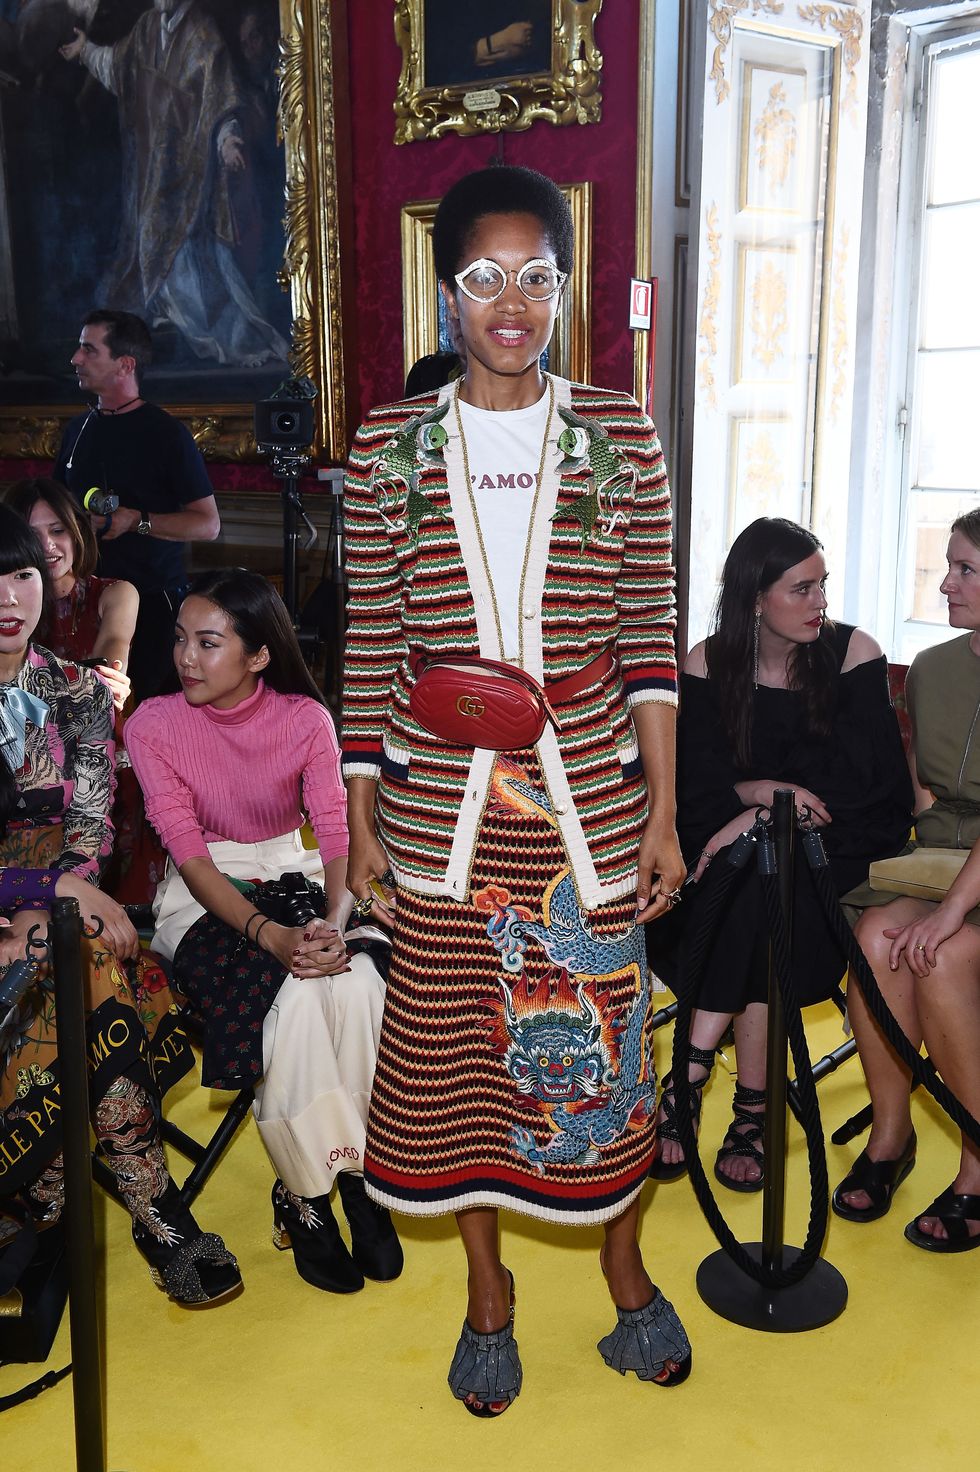 FLORENCE, ITALY - MAY 29: Tamu McPherson attends the Gucci Cruise 2018 fashion show at Palazzo Pitti on May 29, 2017 in Florence, Italy.  (Photo by Stefania D'Alessandro/Getty Images for Gucci)